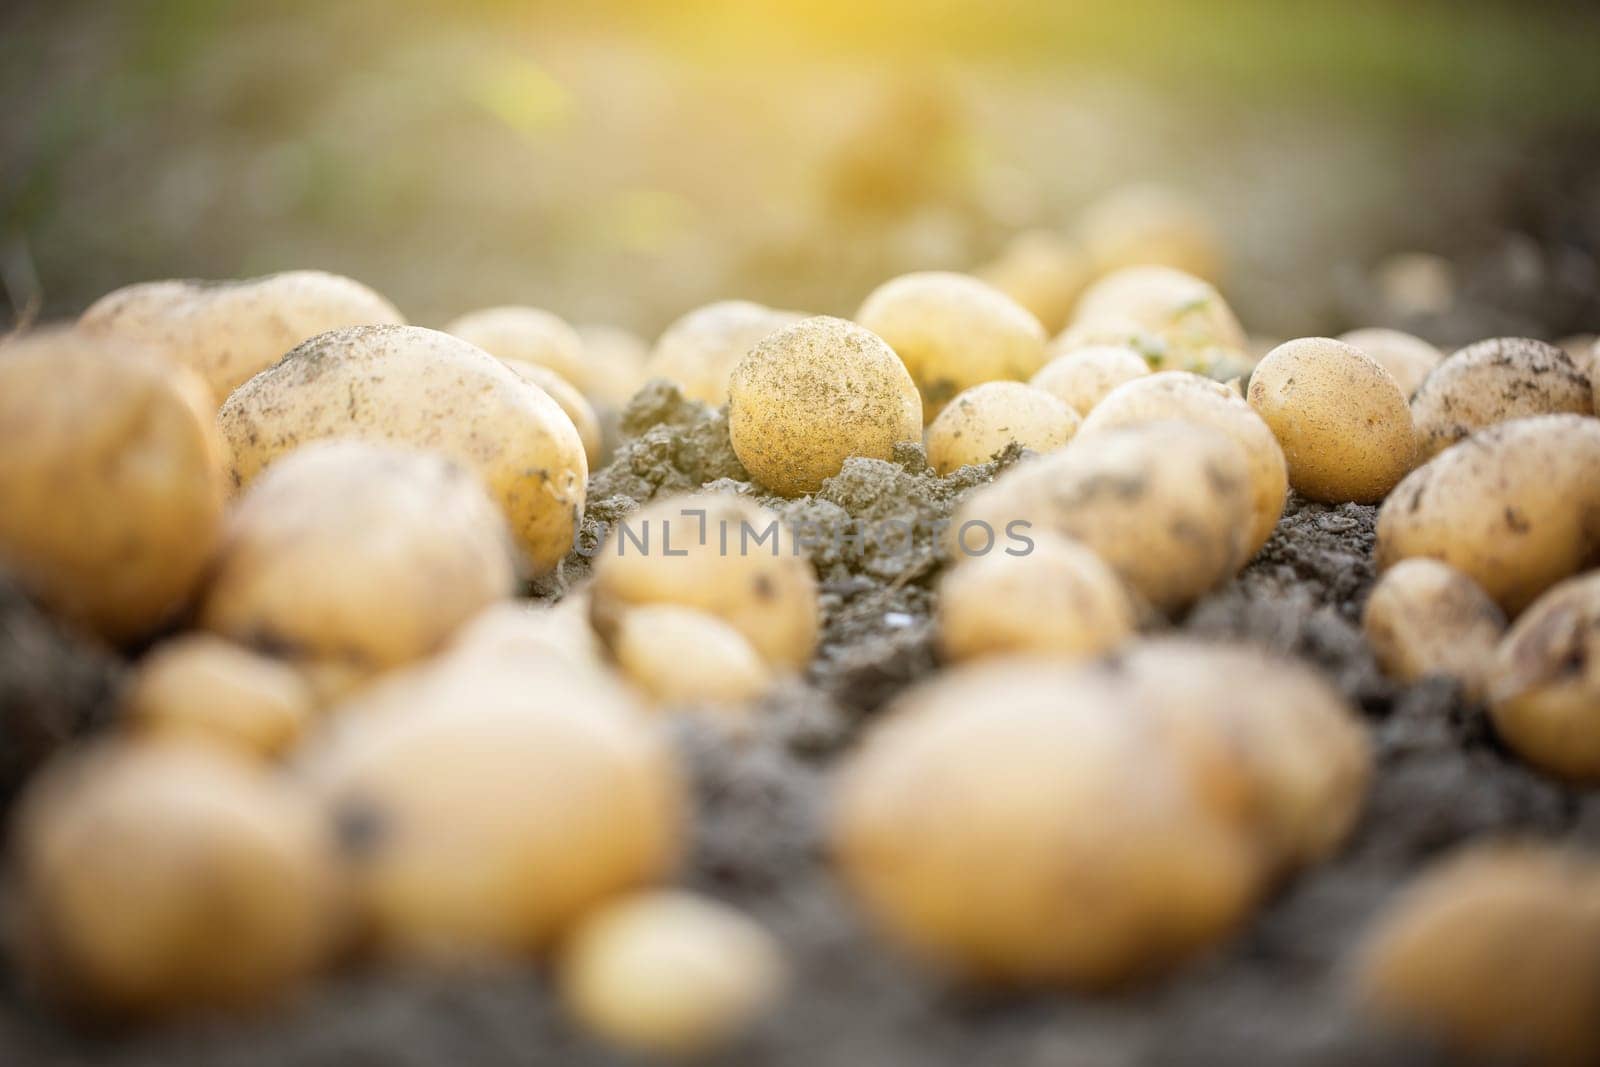 Close up of fresh organic potatoes in a field, agriculture concept